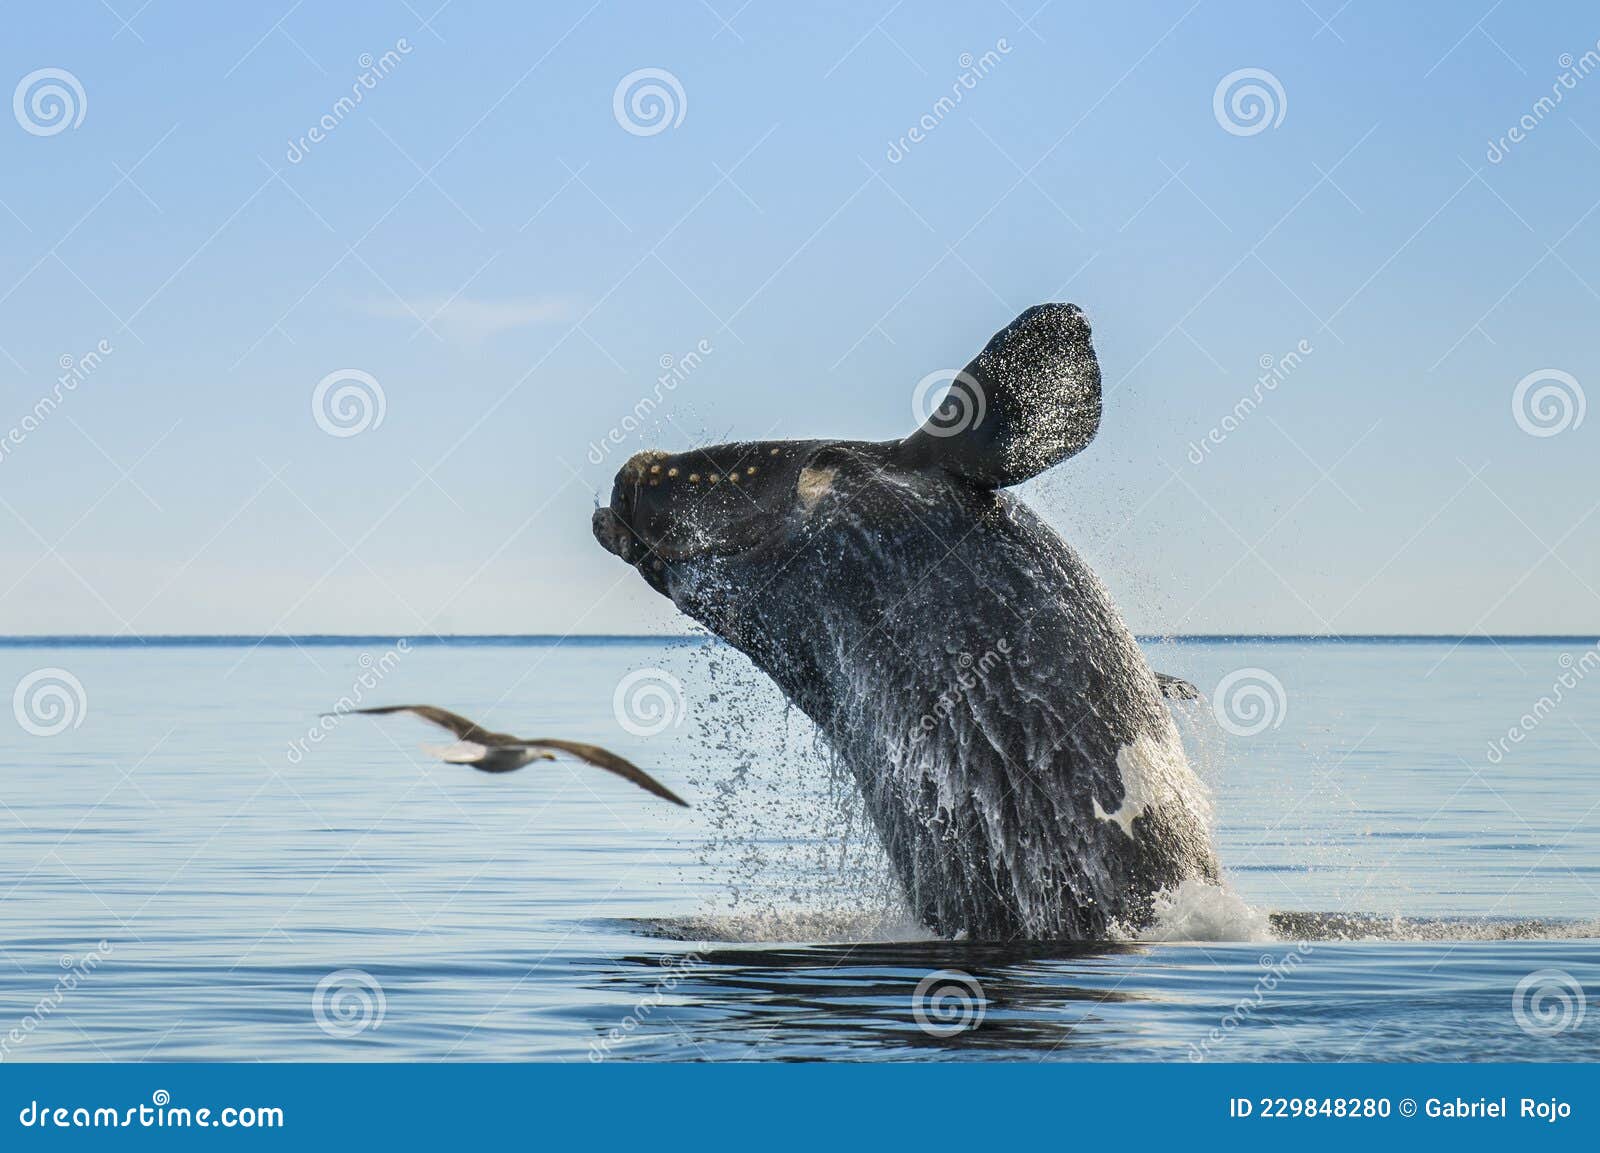 southern right whale,jumping behavior,